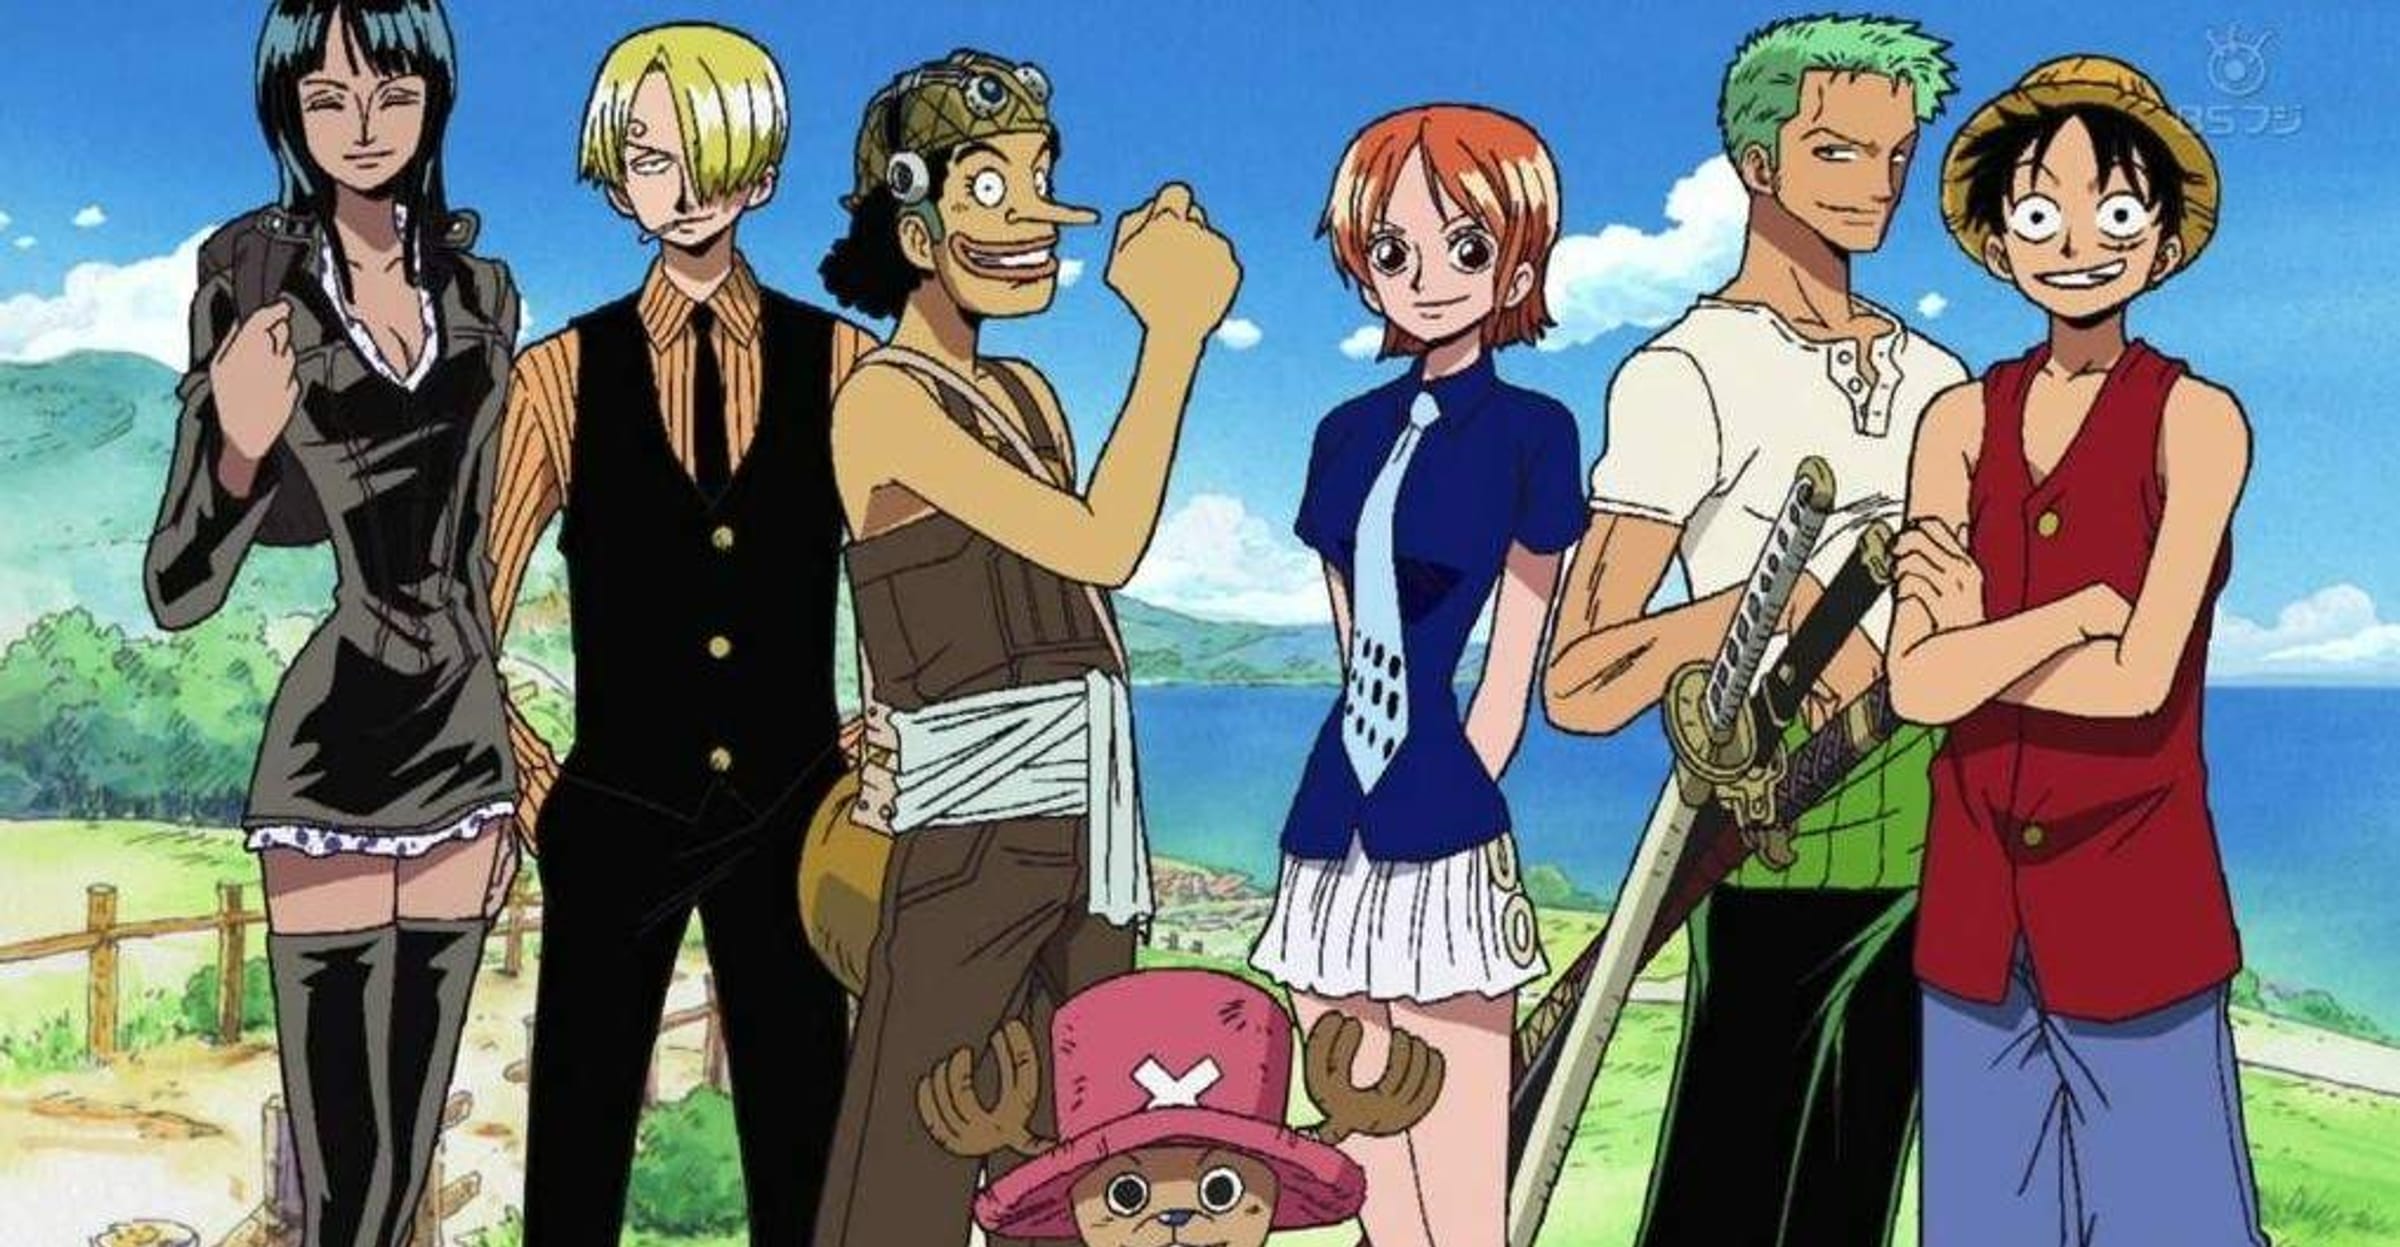 How Would You Rank The Ending Songs? My Friend and I's List: : r/OnePiece